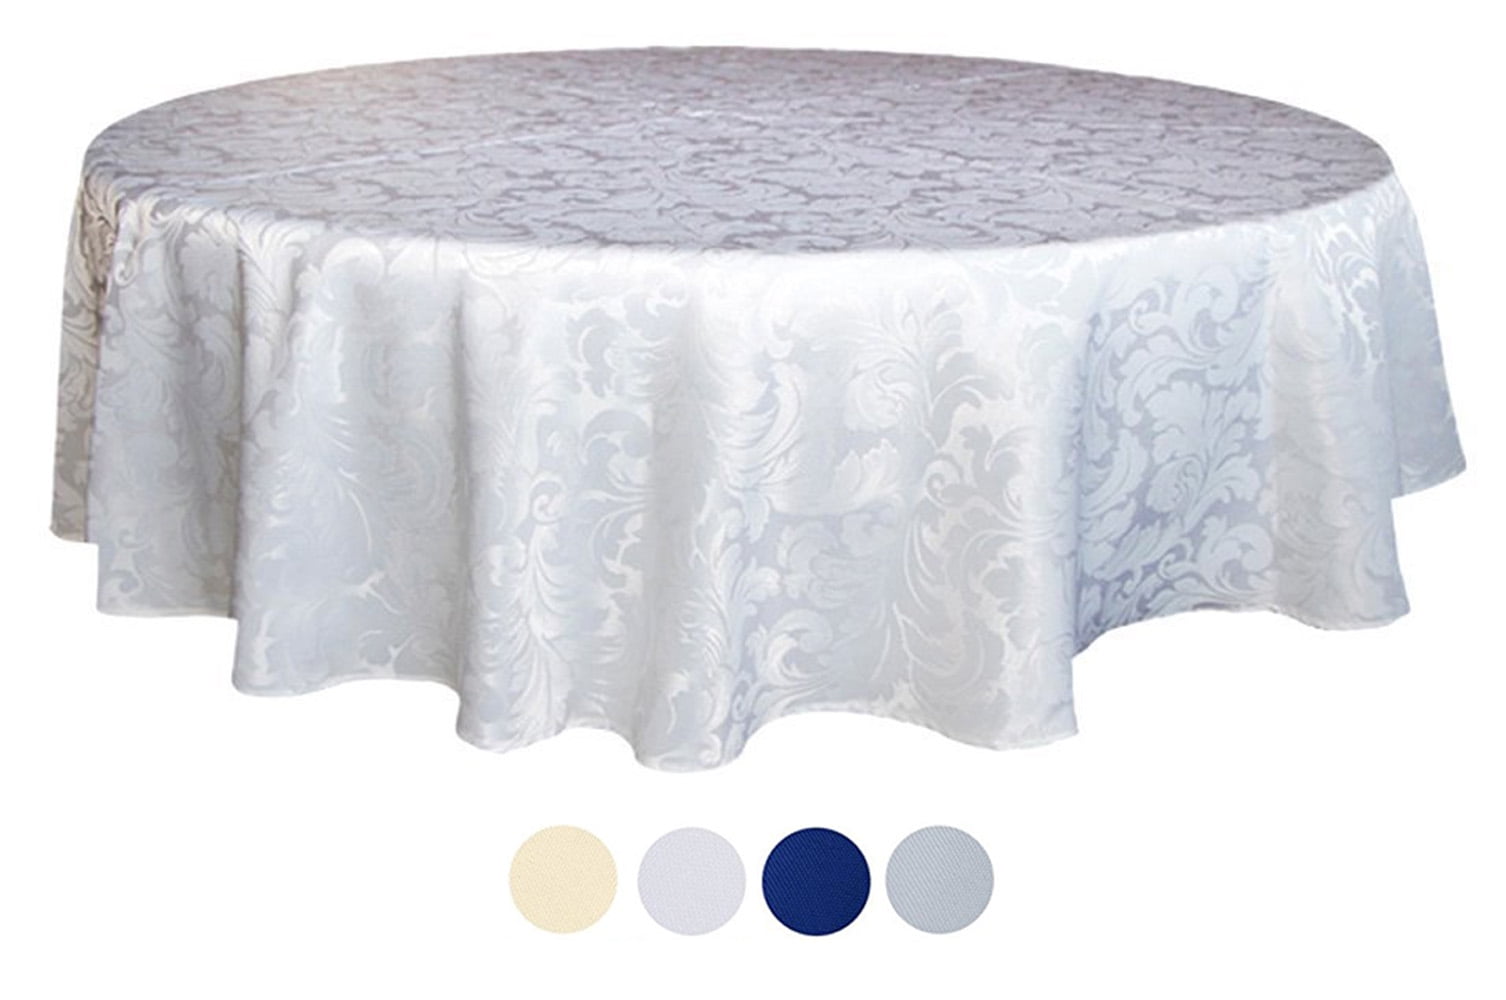 Tektrum 70 Inch Round Damask Jacquard, How To Make 70 Inch Round Tablecloth